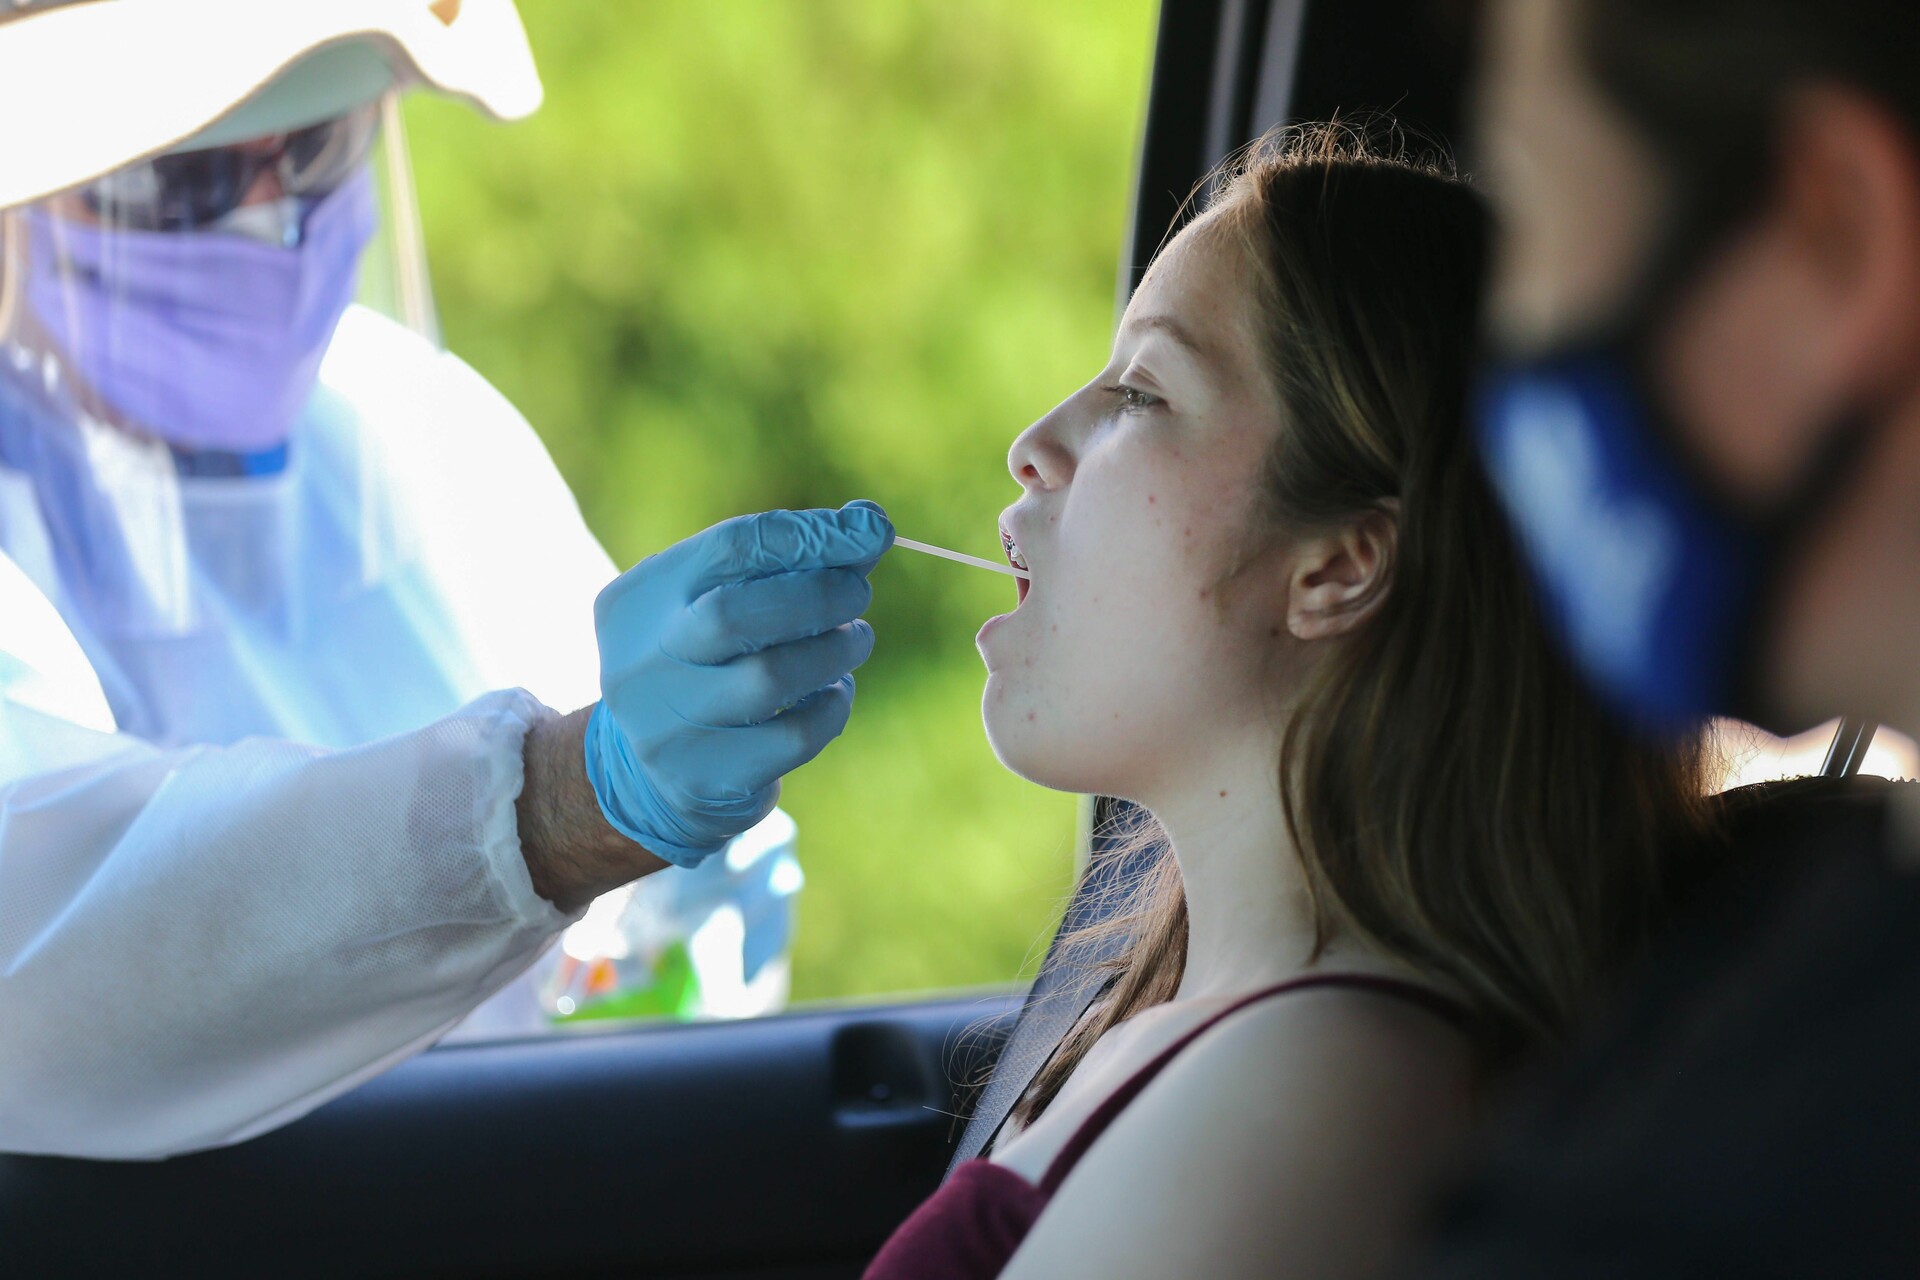 A healthcare worker wearing PPE reaches through an open car window to administer a throat swab to a girl sitting in the car.